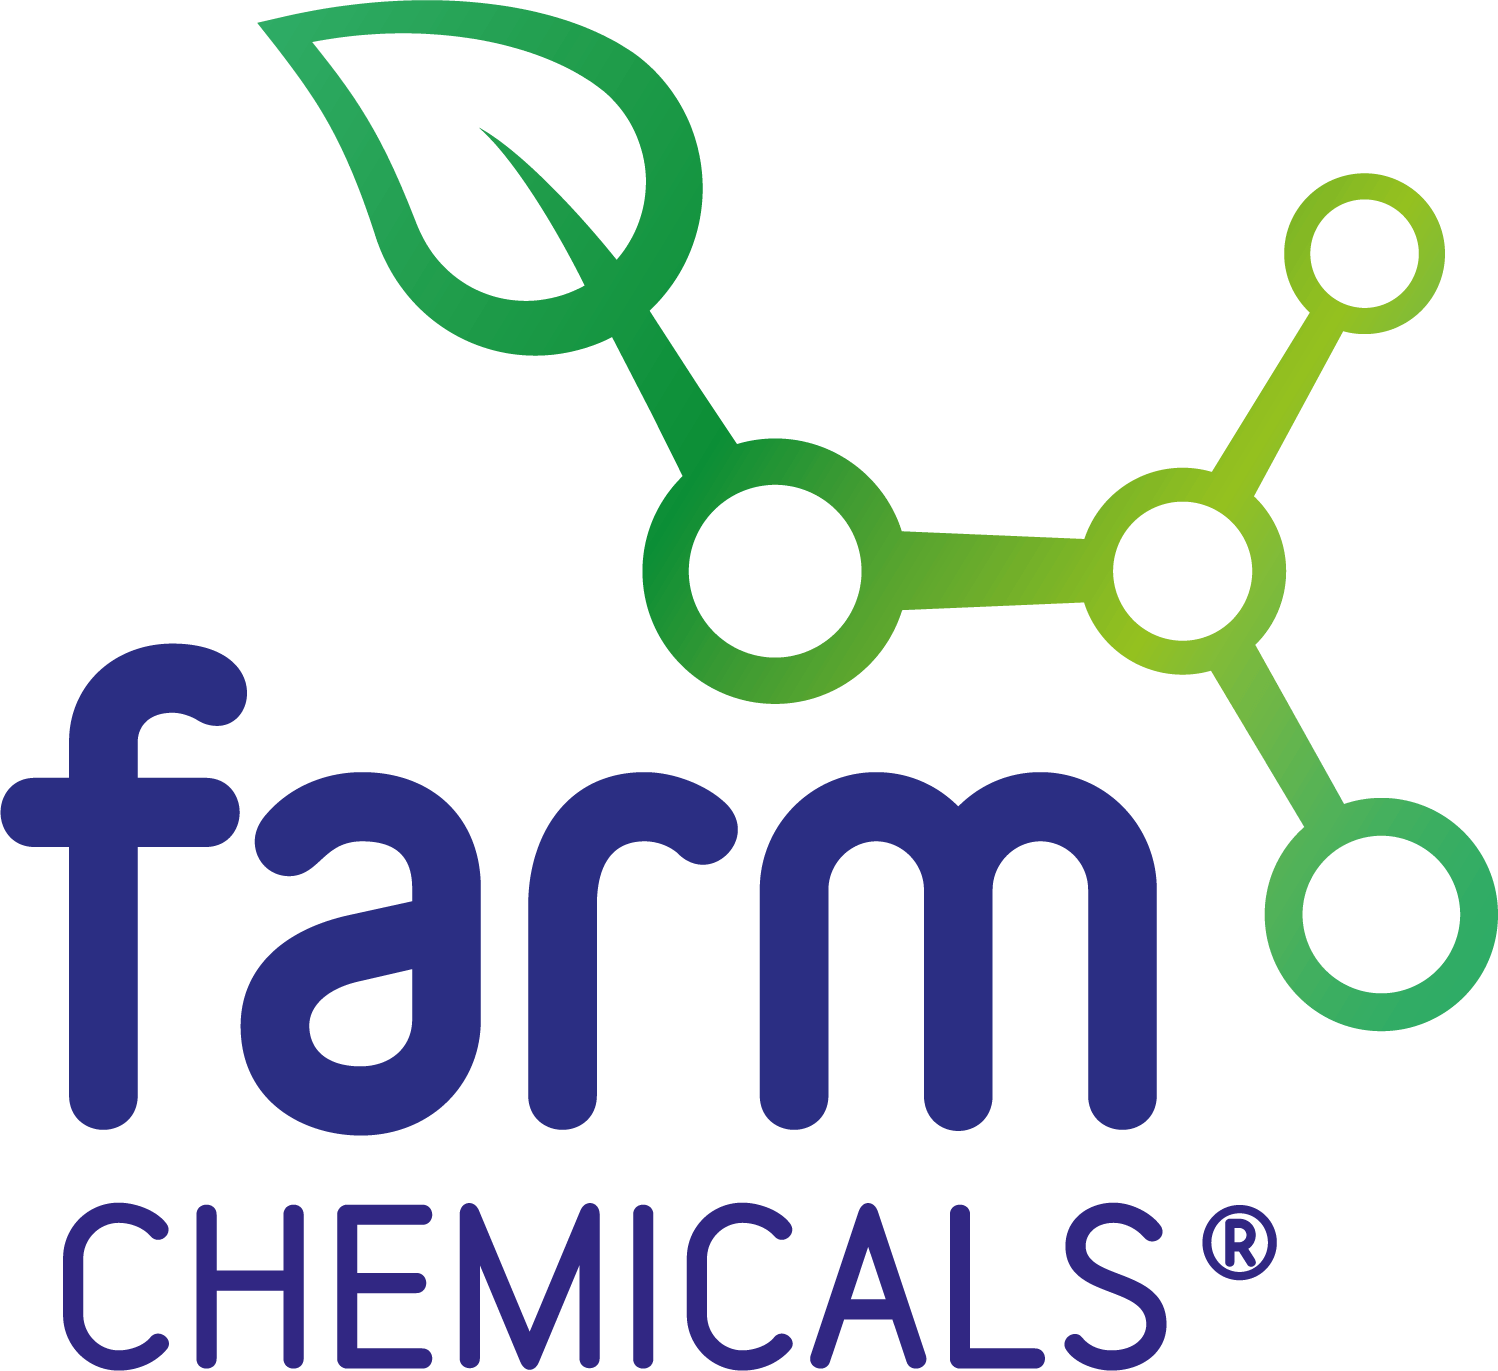 Chemicals Logo - Farm Chemicals - Formulation and commercialization of specialty ...